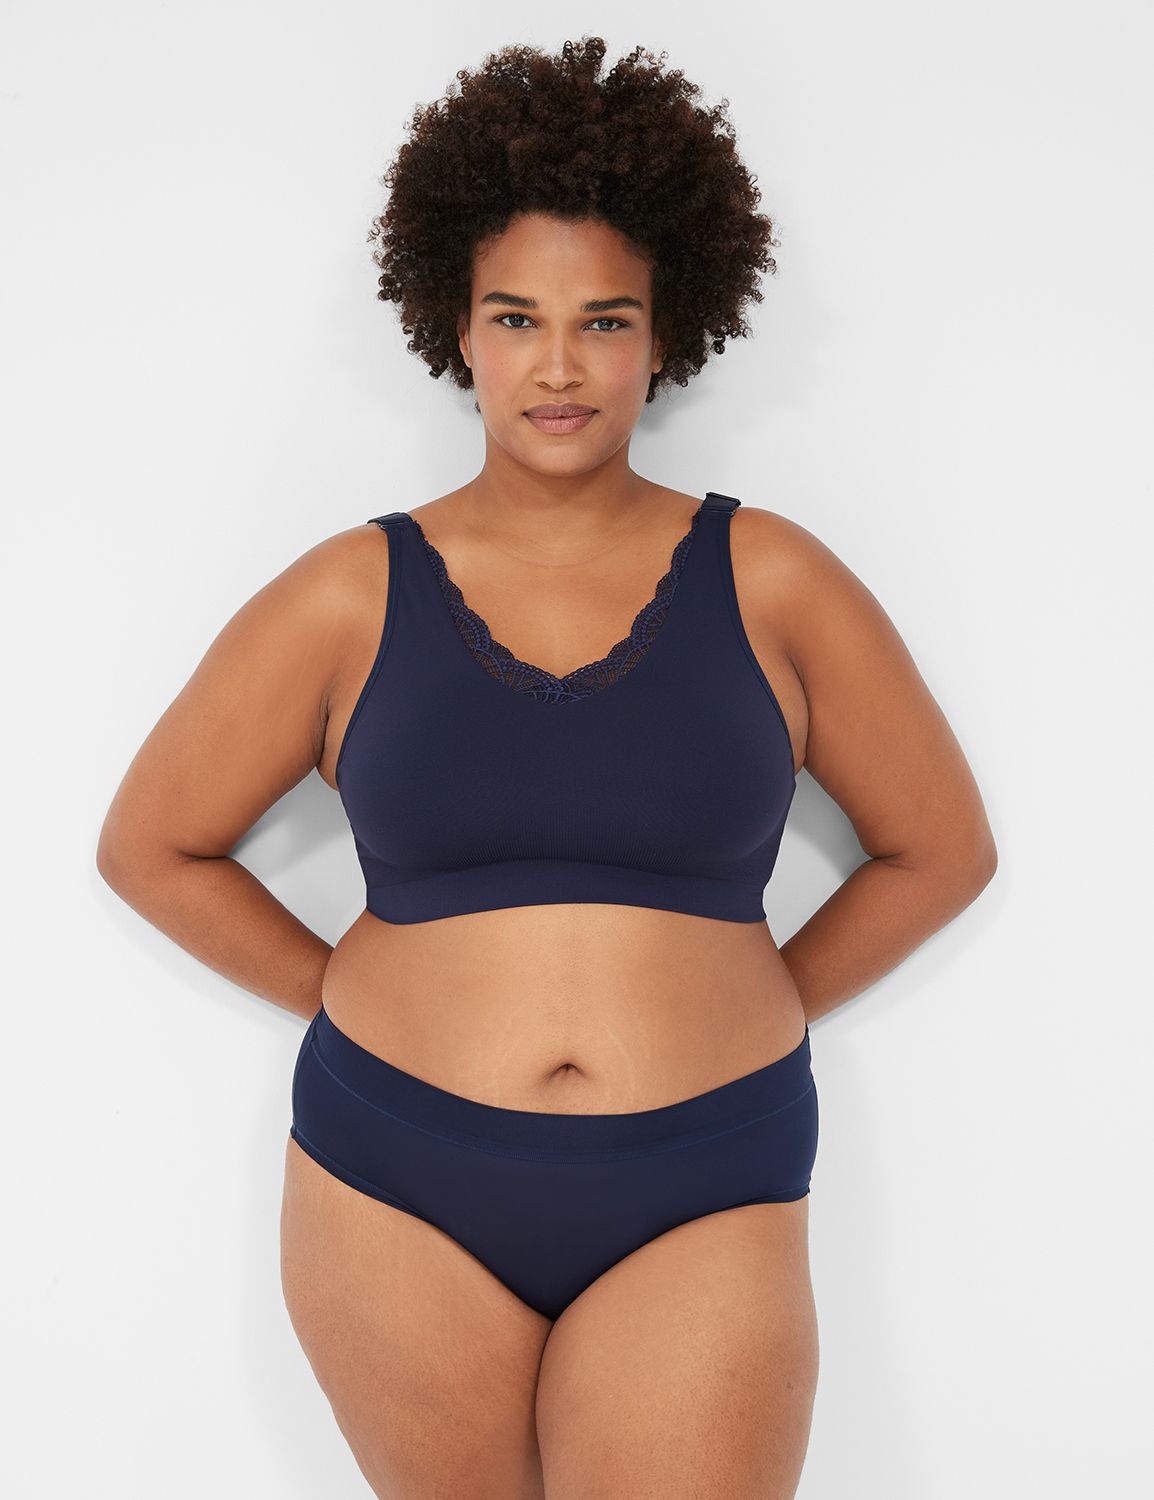 Total booty bliss is HERE (& it's on sale). - Cacique